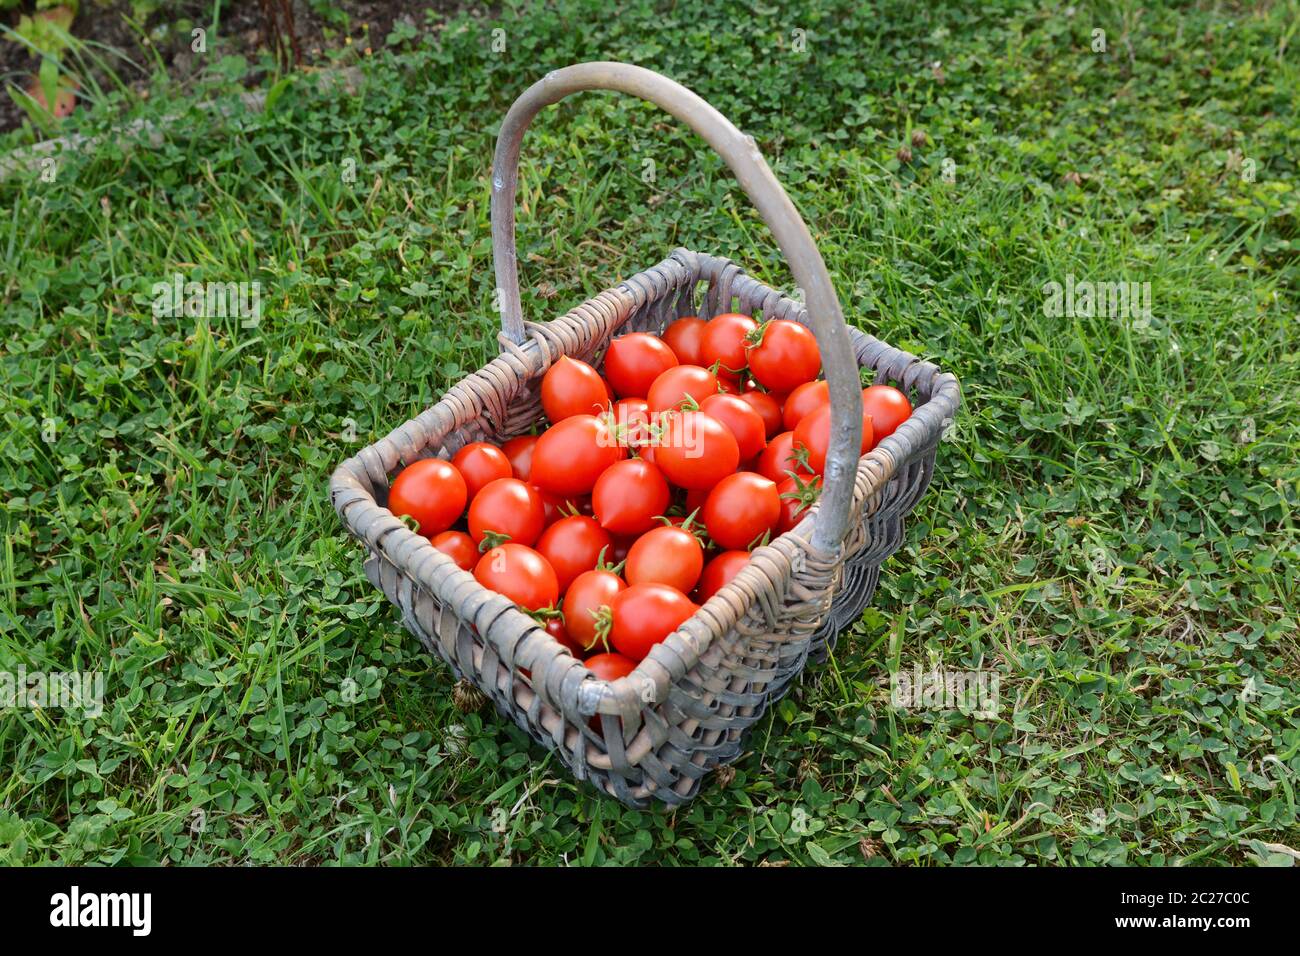 Freshly harvested Red Alert cherry tomatoes in a woven basket on lush green grass in an allotment garden Stock Photo